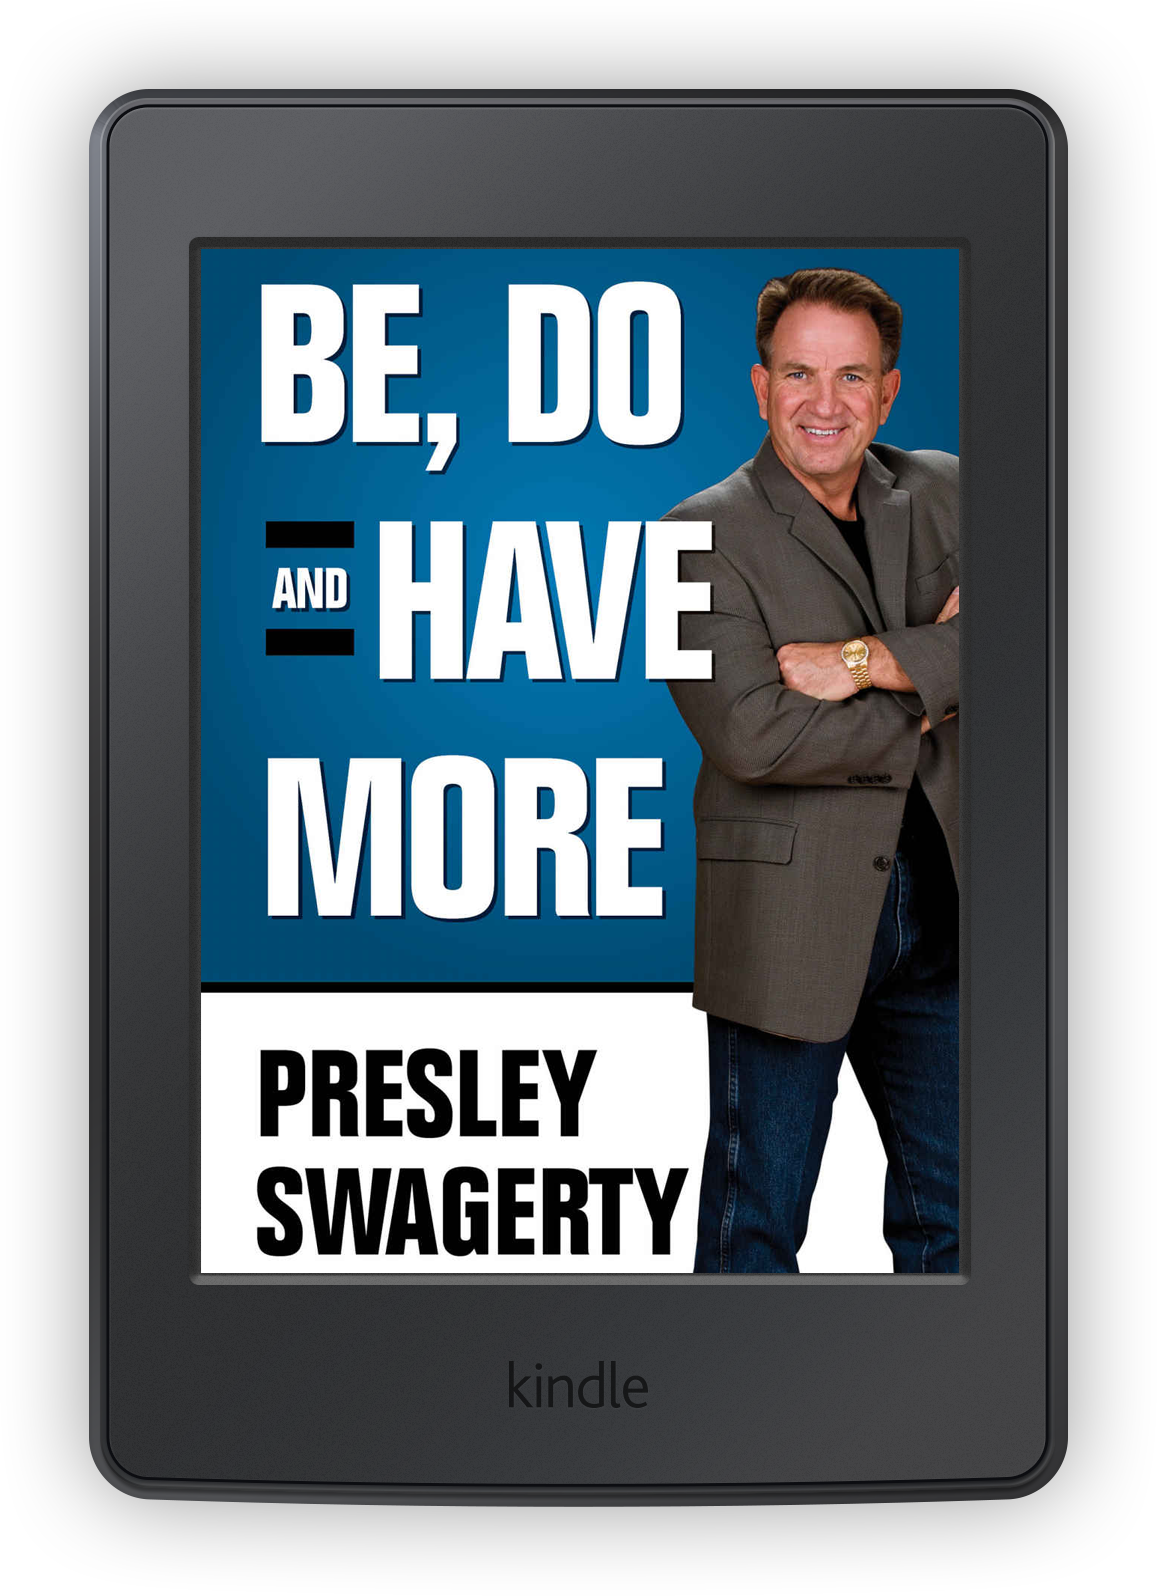 Photo of Be Do and Have More book cover by Presley Swagerty on Kindle tablet